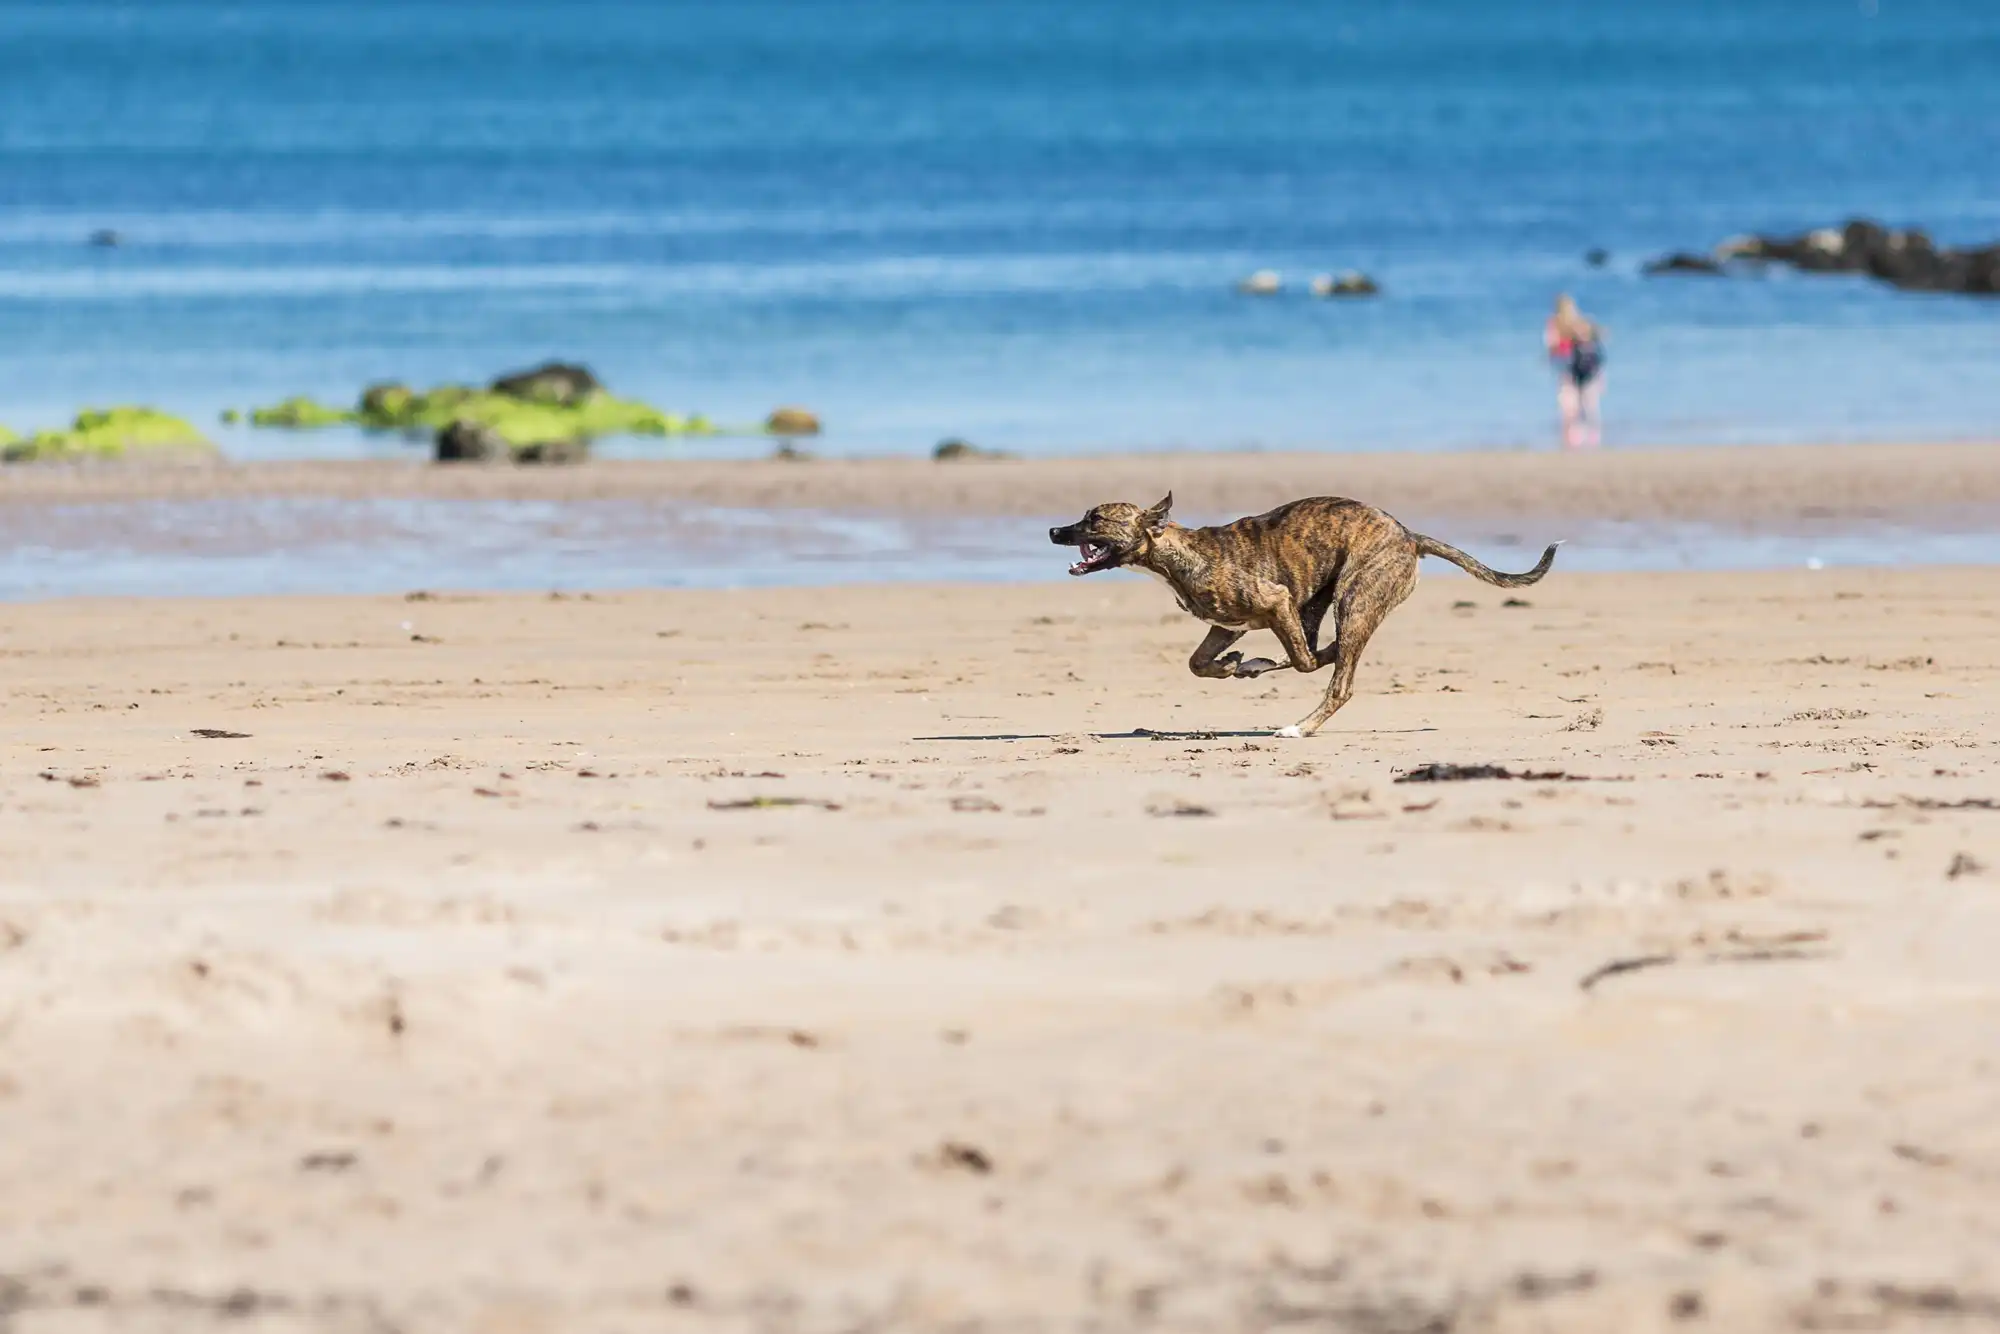 A dog carrying a stick runs across a sandy beach with the ocean and a person in the background.